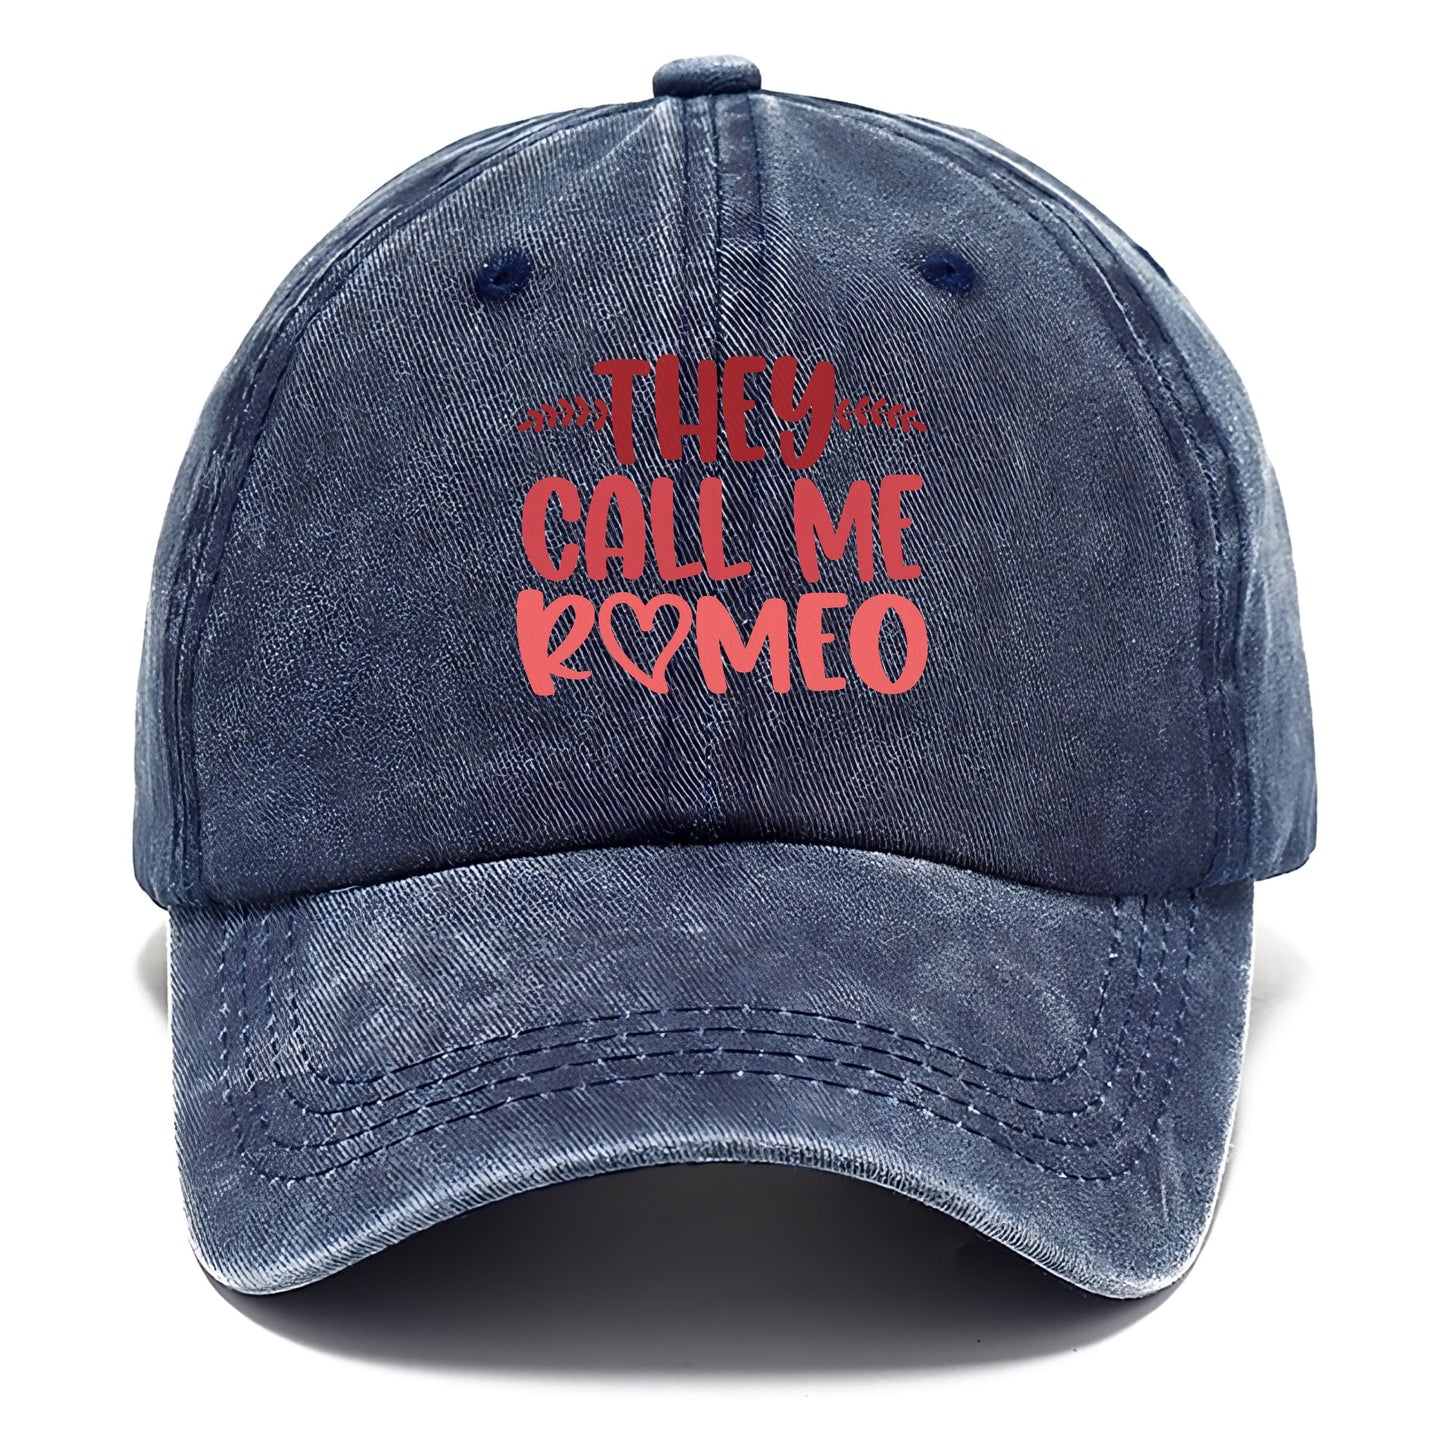 they call me romeo Hat